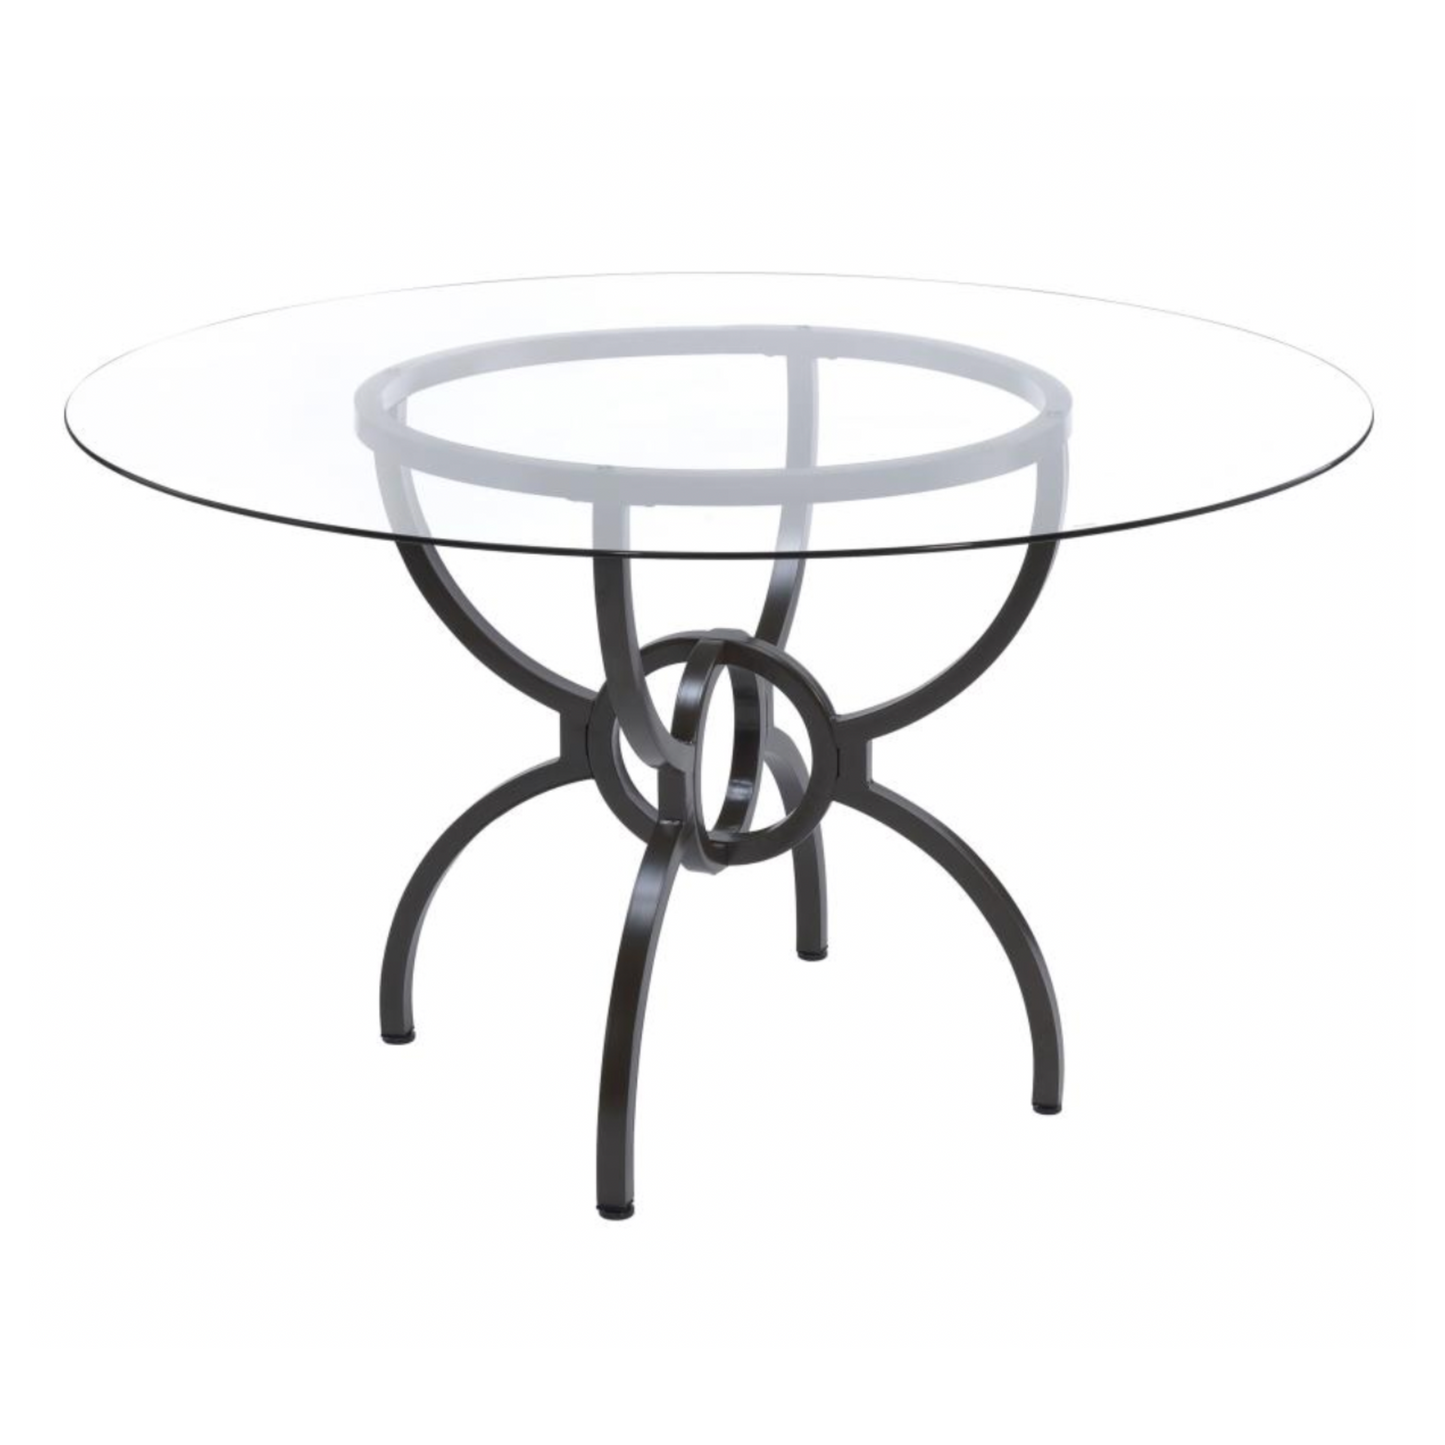 AVIANO 48" Round Glass Top Dining Table